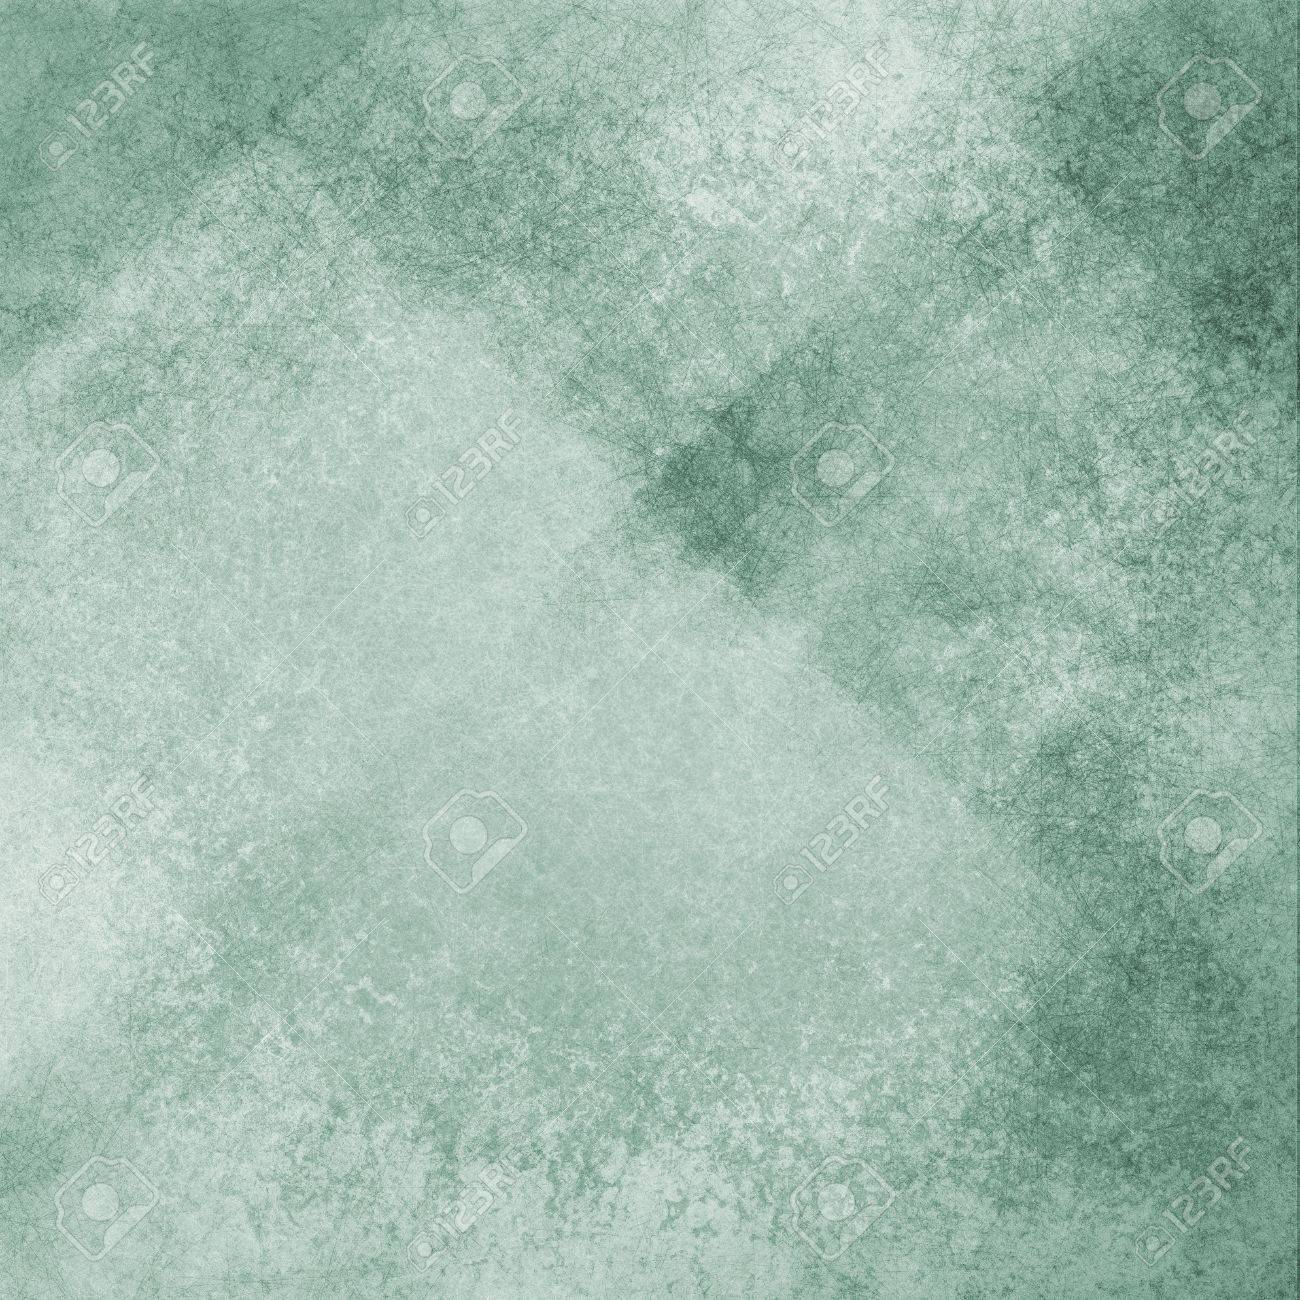 Dull Faded Green Background With White Angled Blocks And Stripes